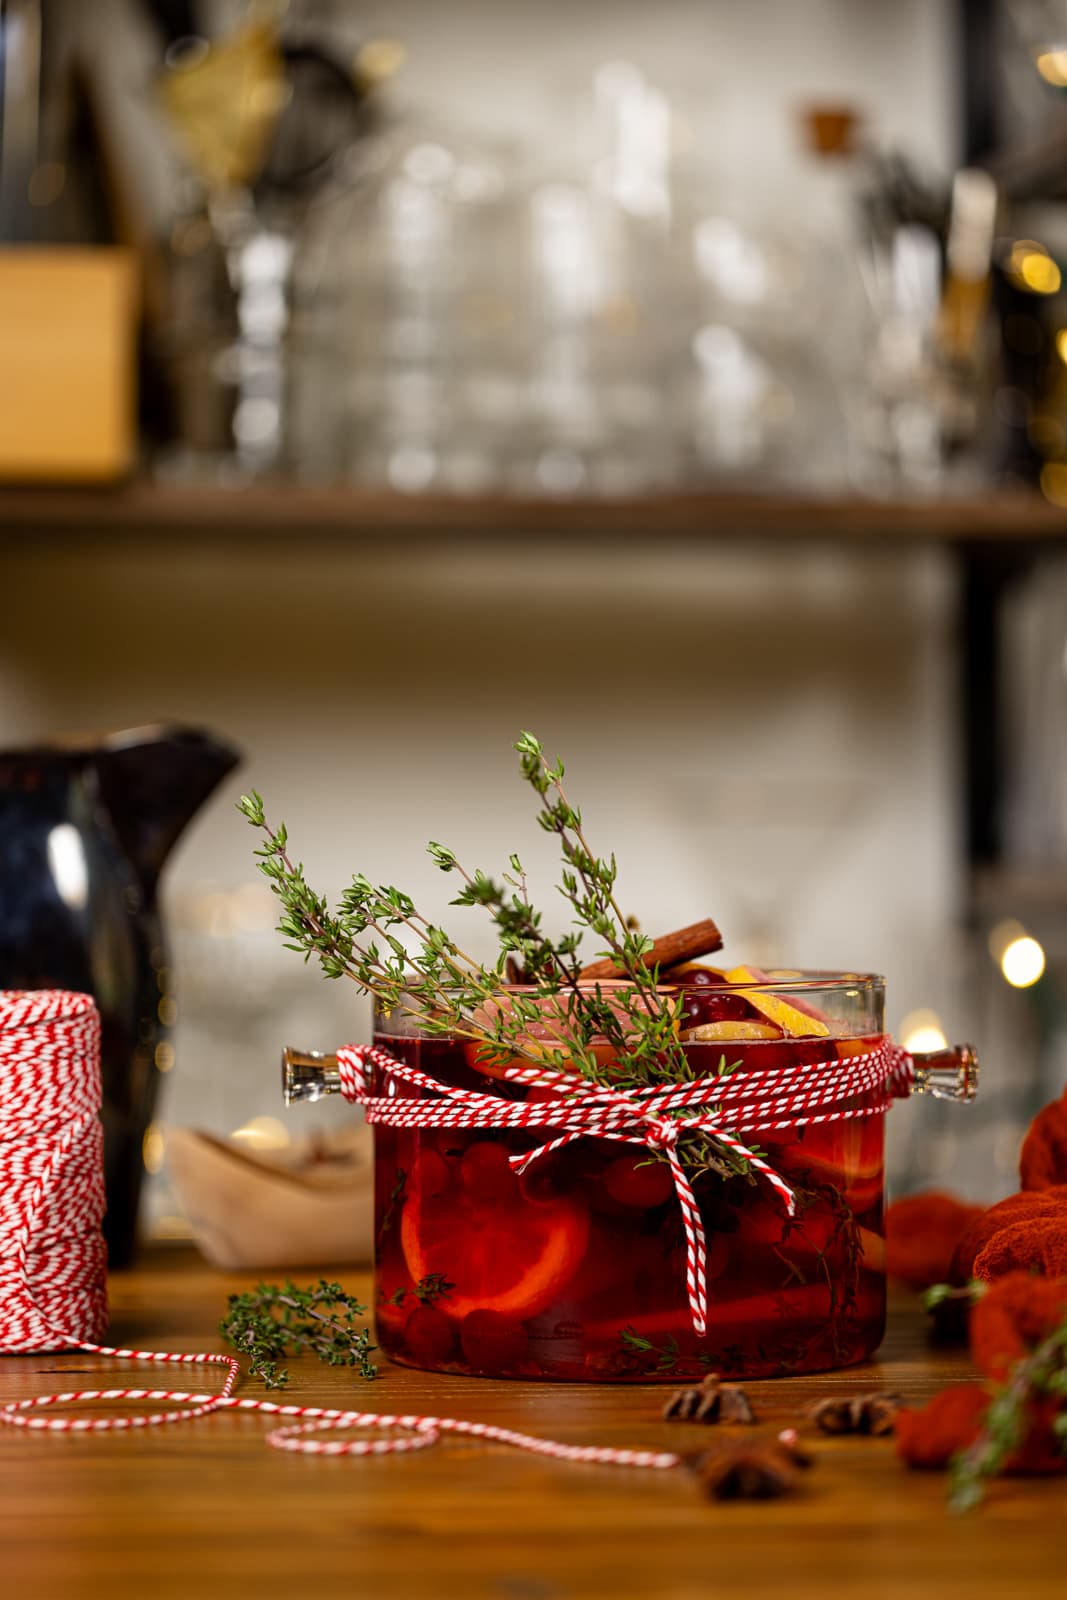 Holiday simmer pot with red string and garnish on a brown wood table.